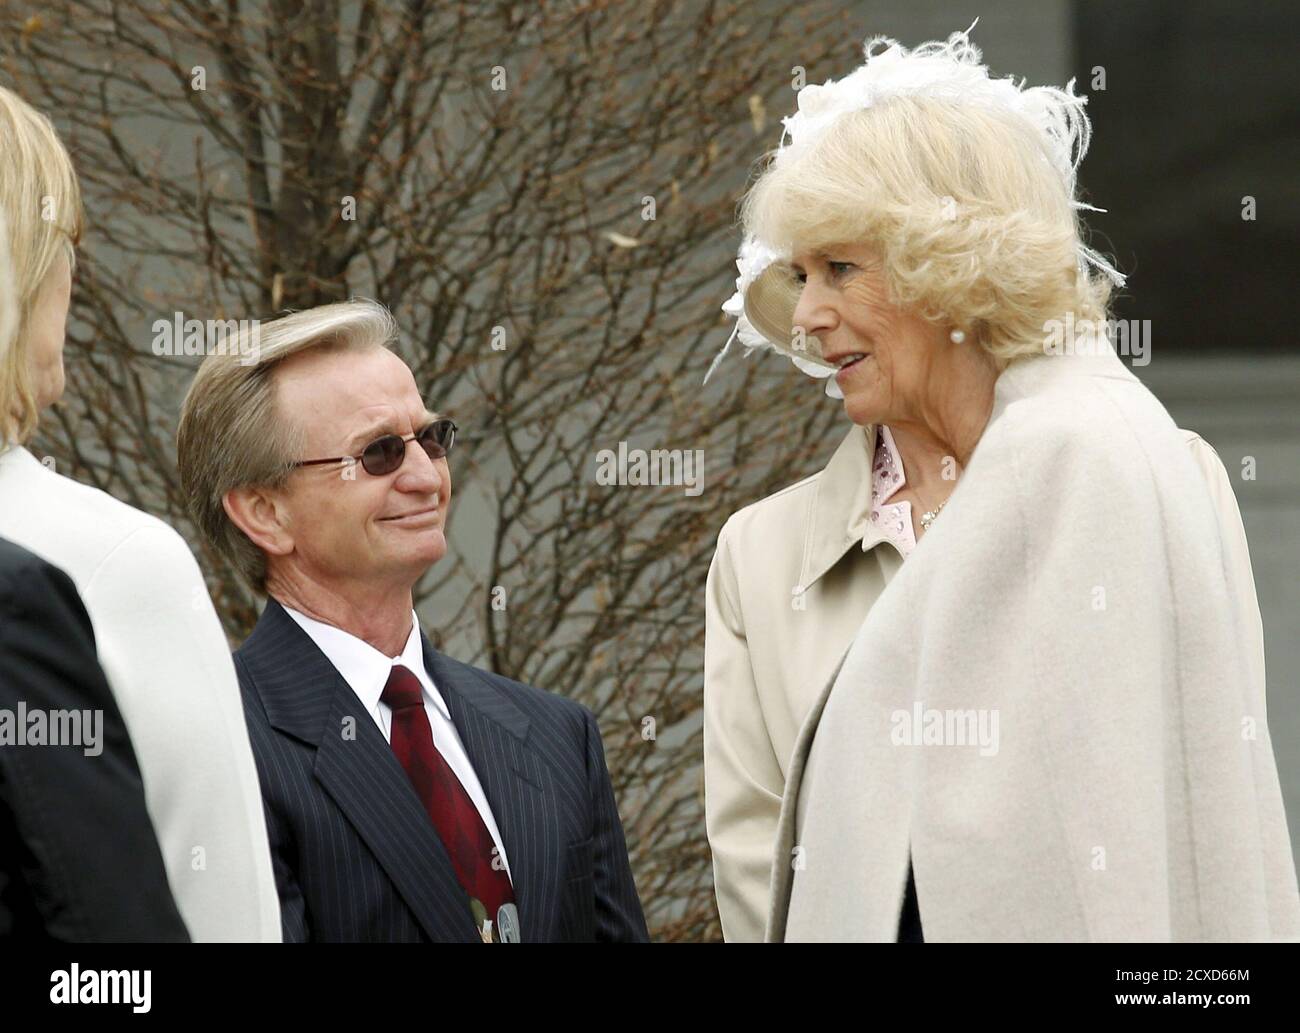 Camilla, Duchess of Cornwall (R) talks with Hall of Fame Jockey Pat Day (L)  at Churchill Downs, home of the Kentucky Derby horse race, during her visit  in Louisville, Kentucky March 20,